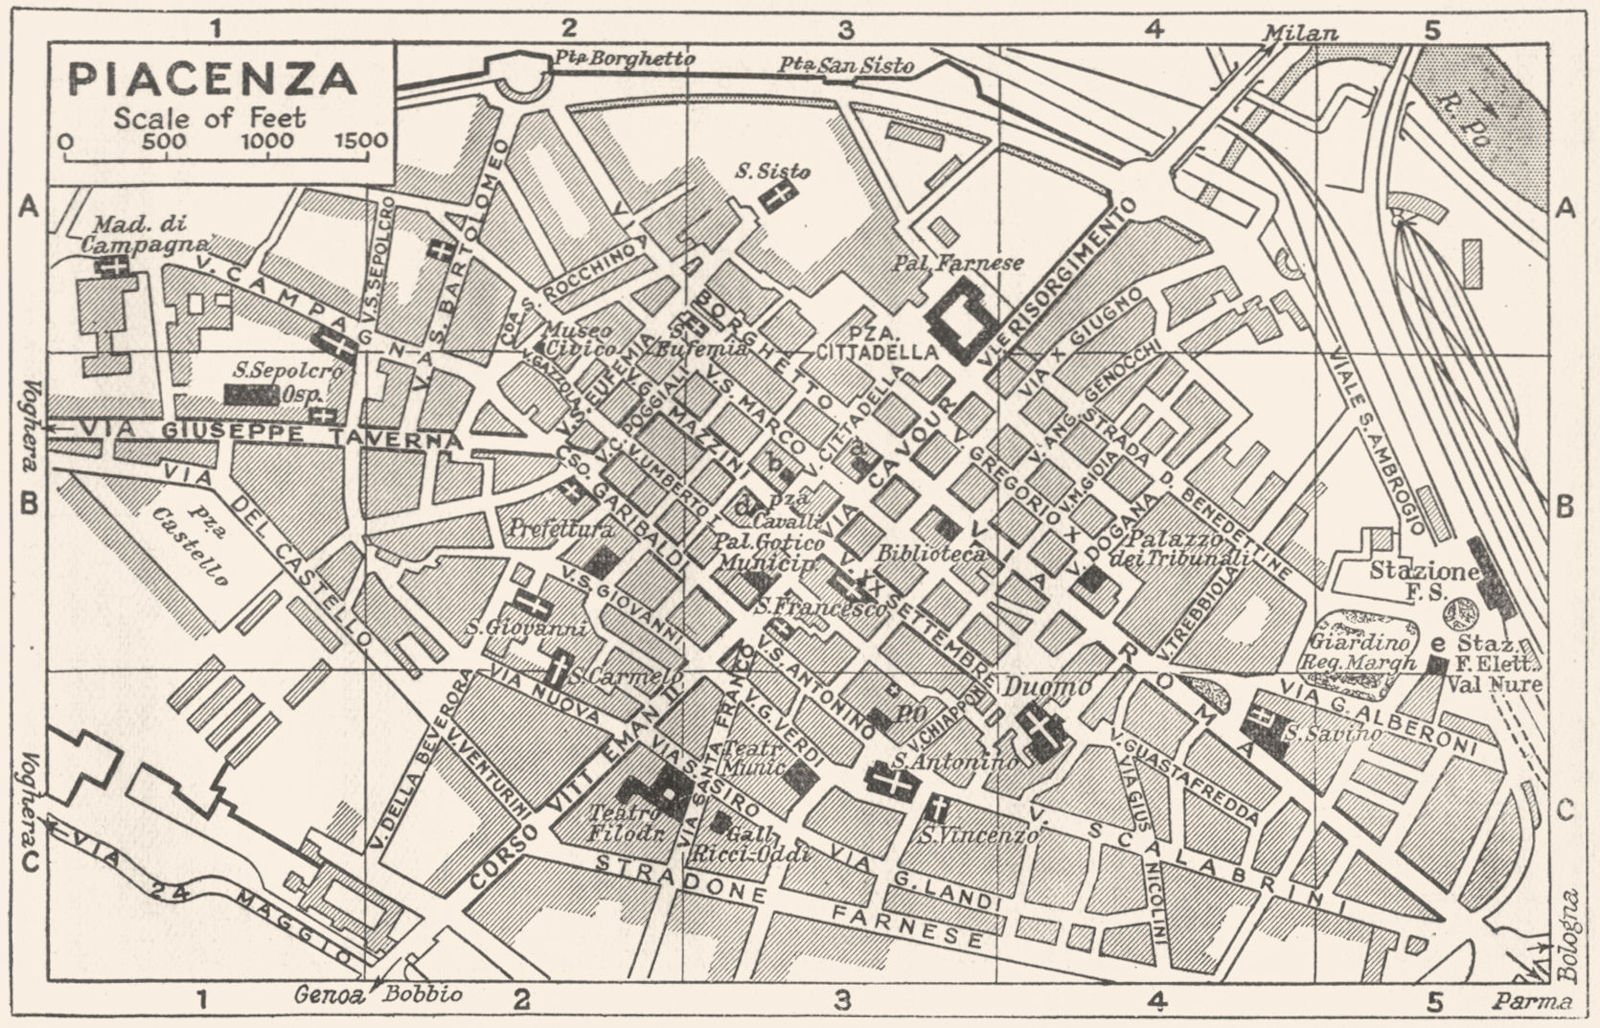 Associate Product PIACENZA town/city plan. Italy 1953 old vintage map chart